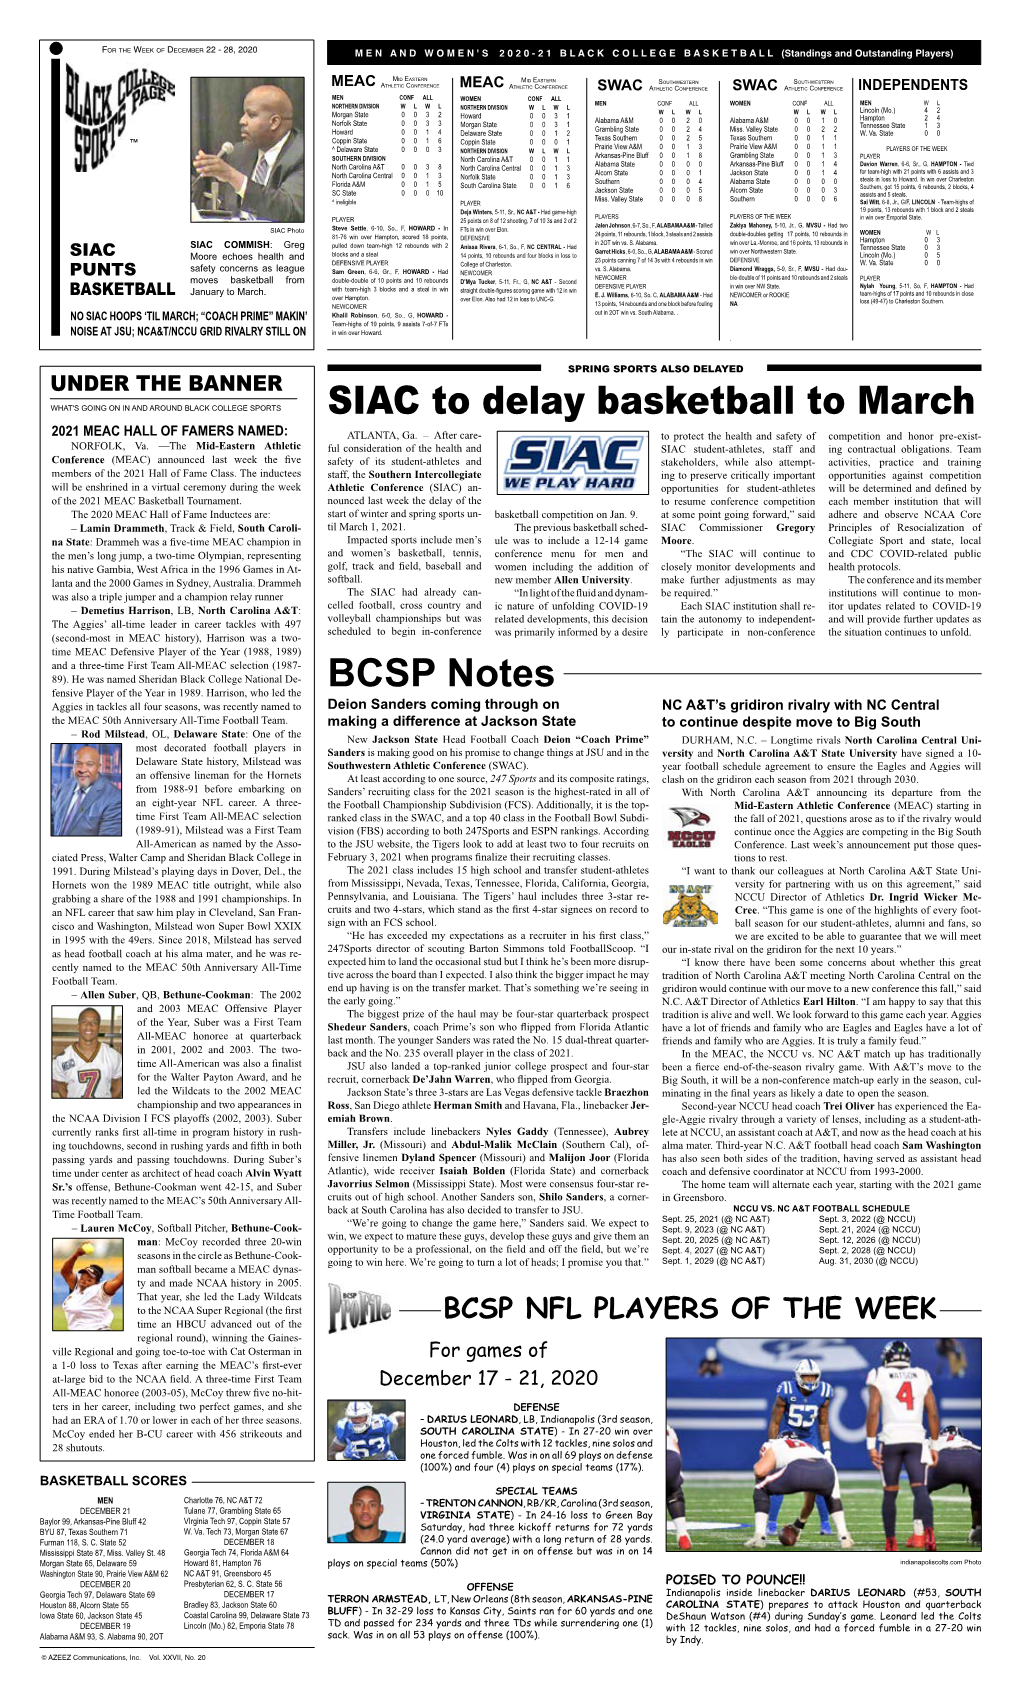 SIAC to Delay Basketball to March BCSP Notes